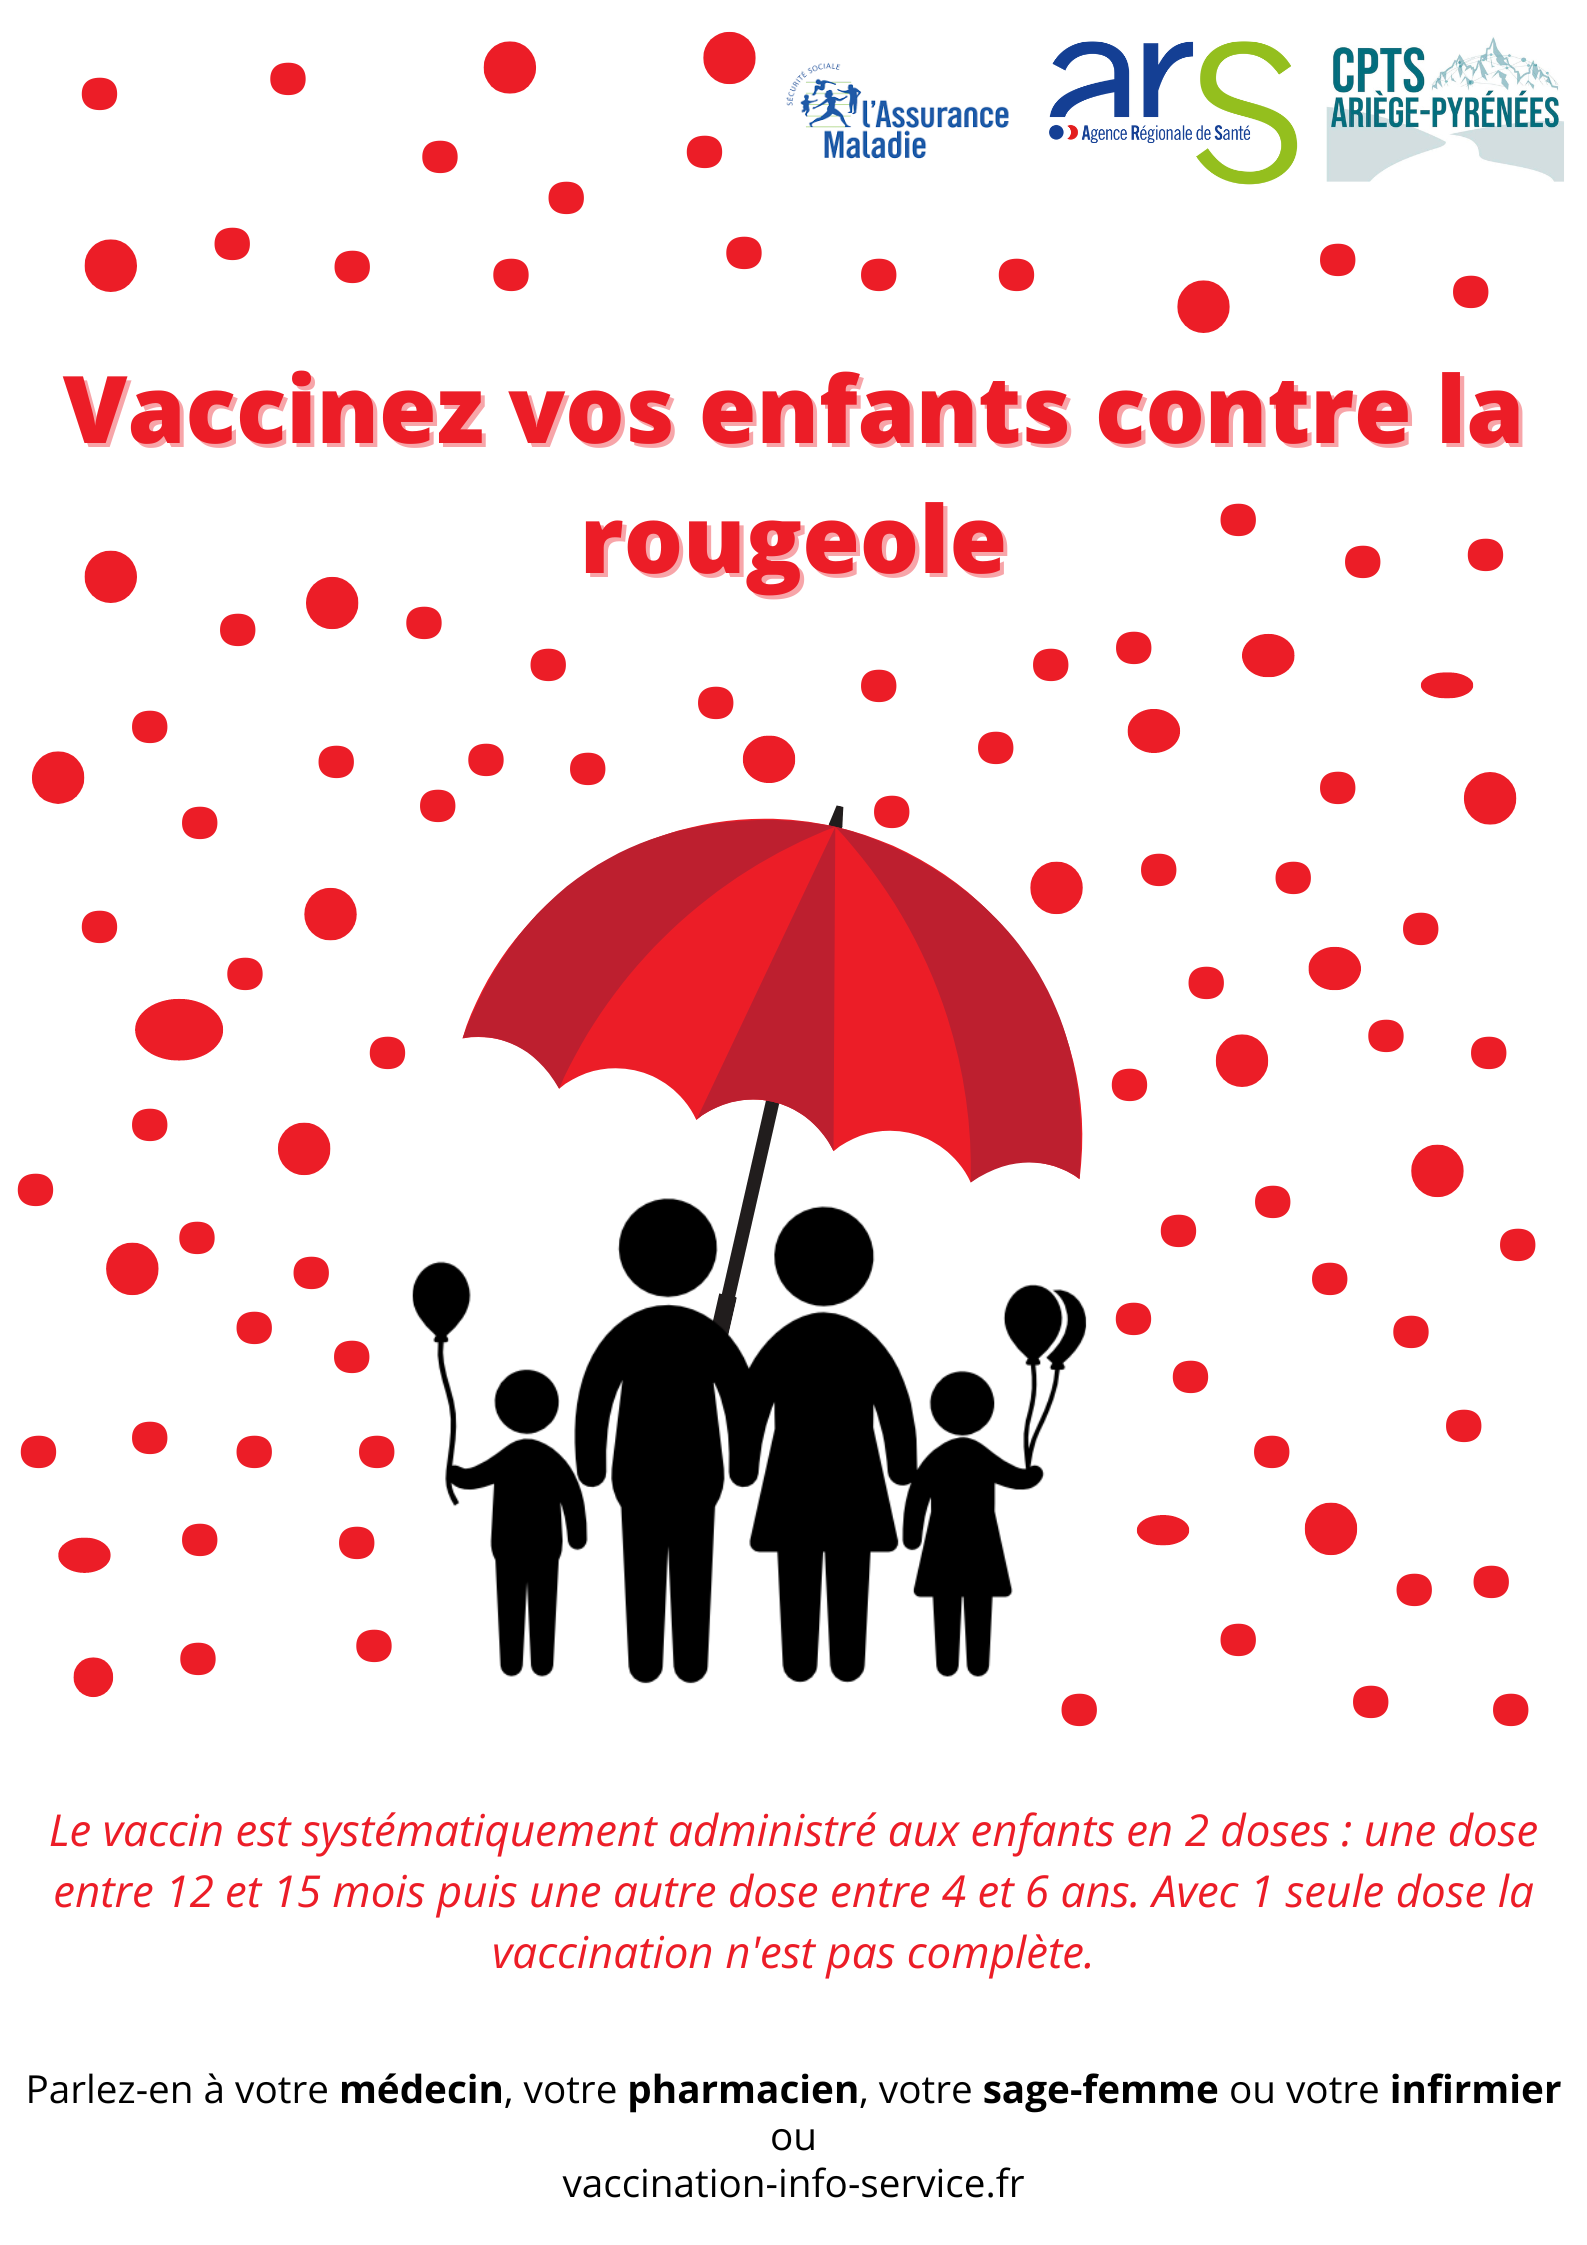 affiche vaccination rougeole